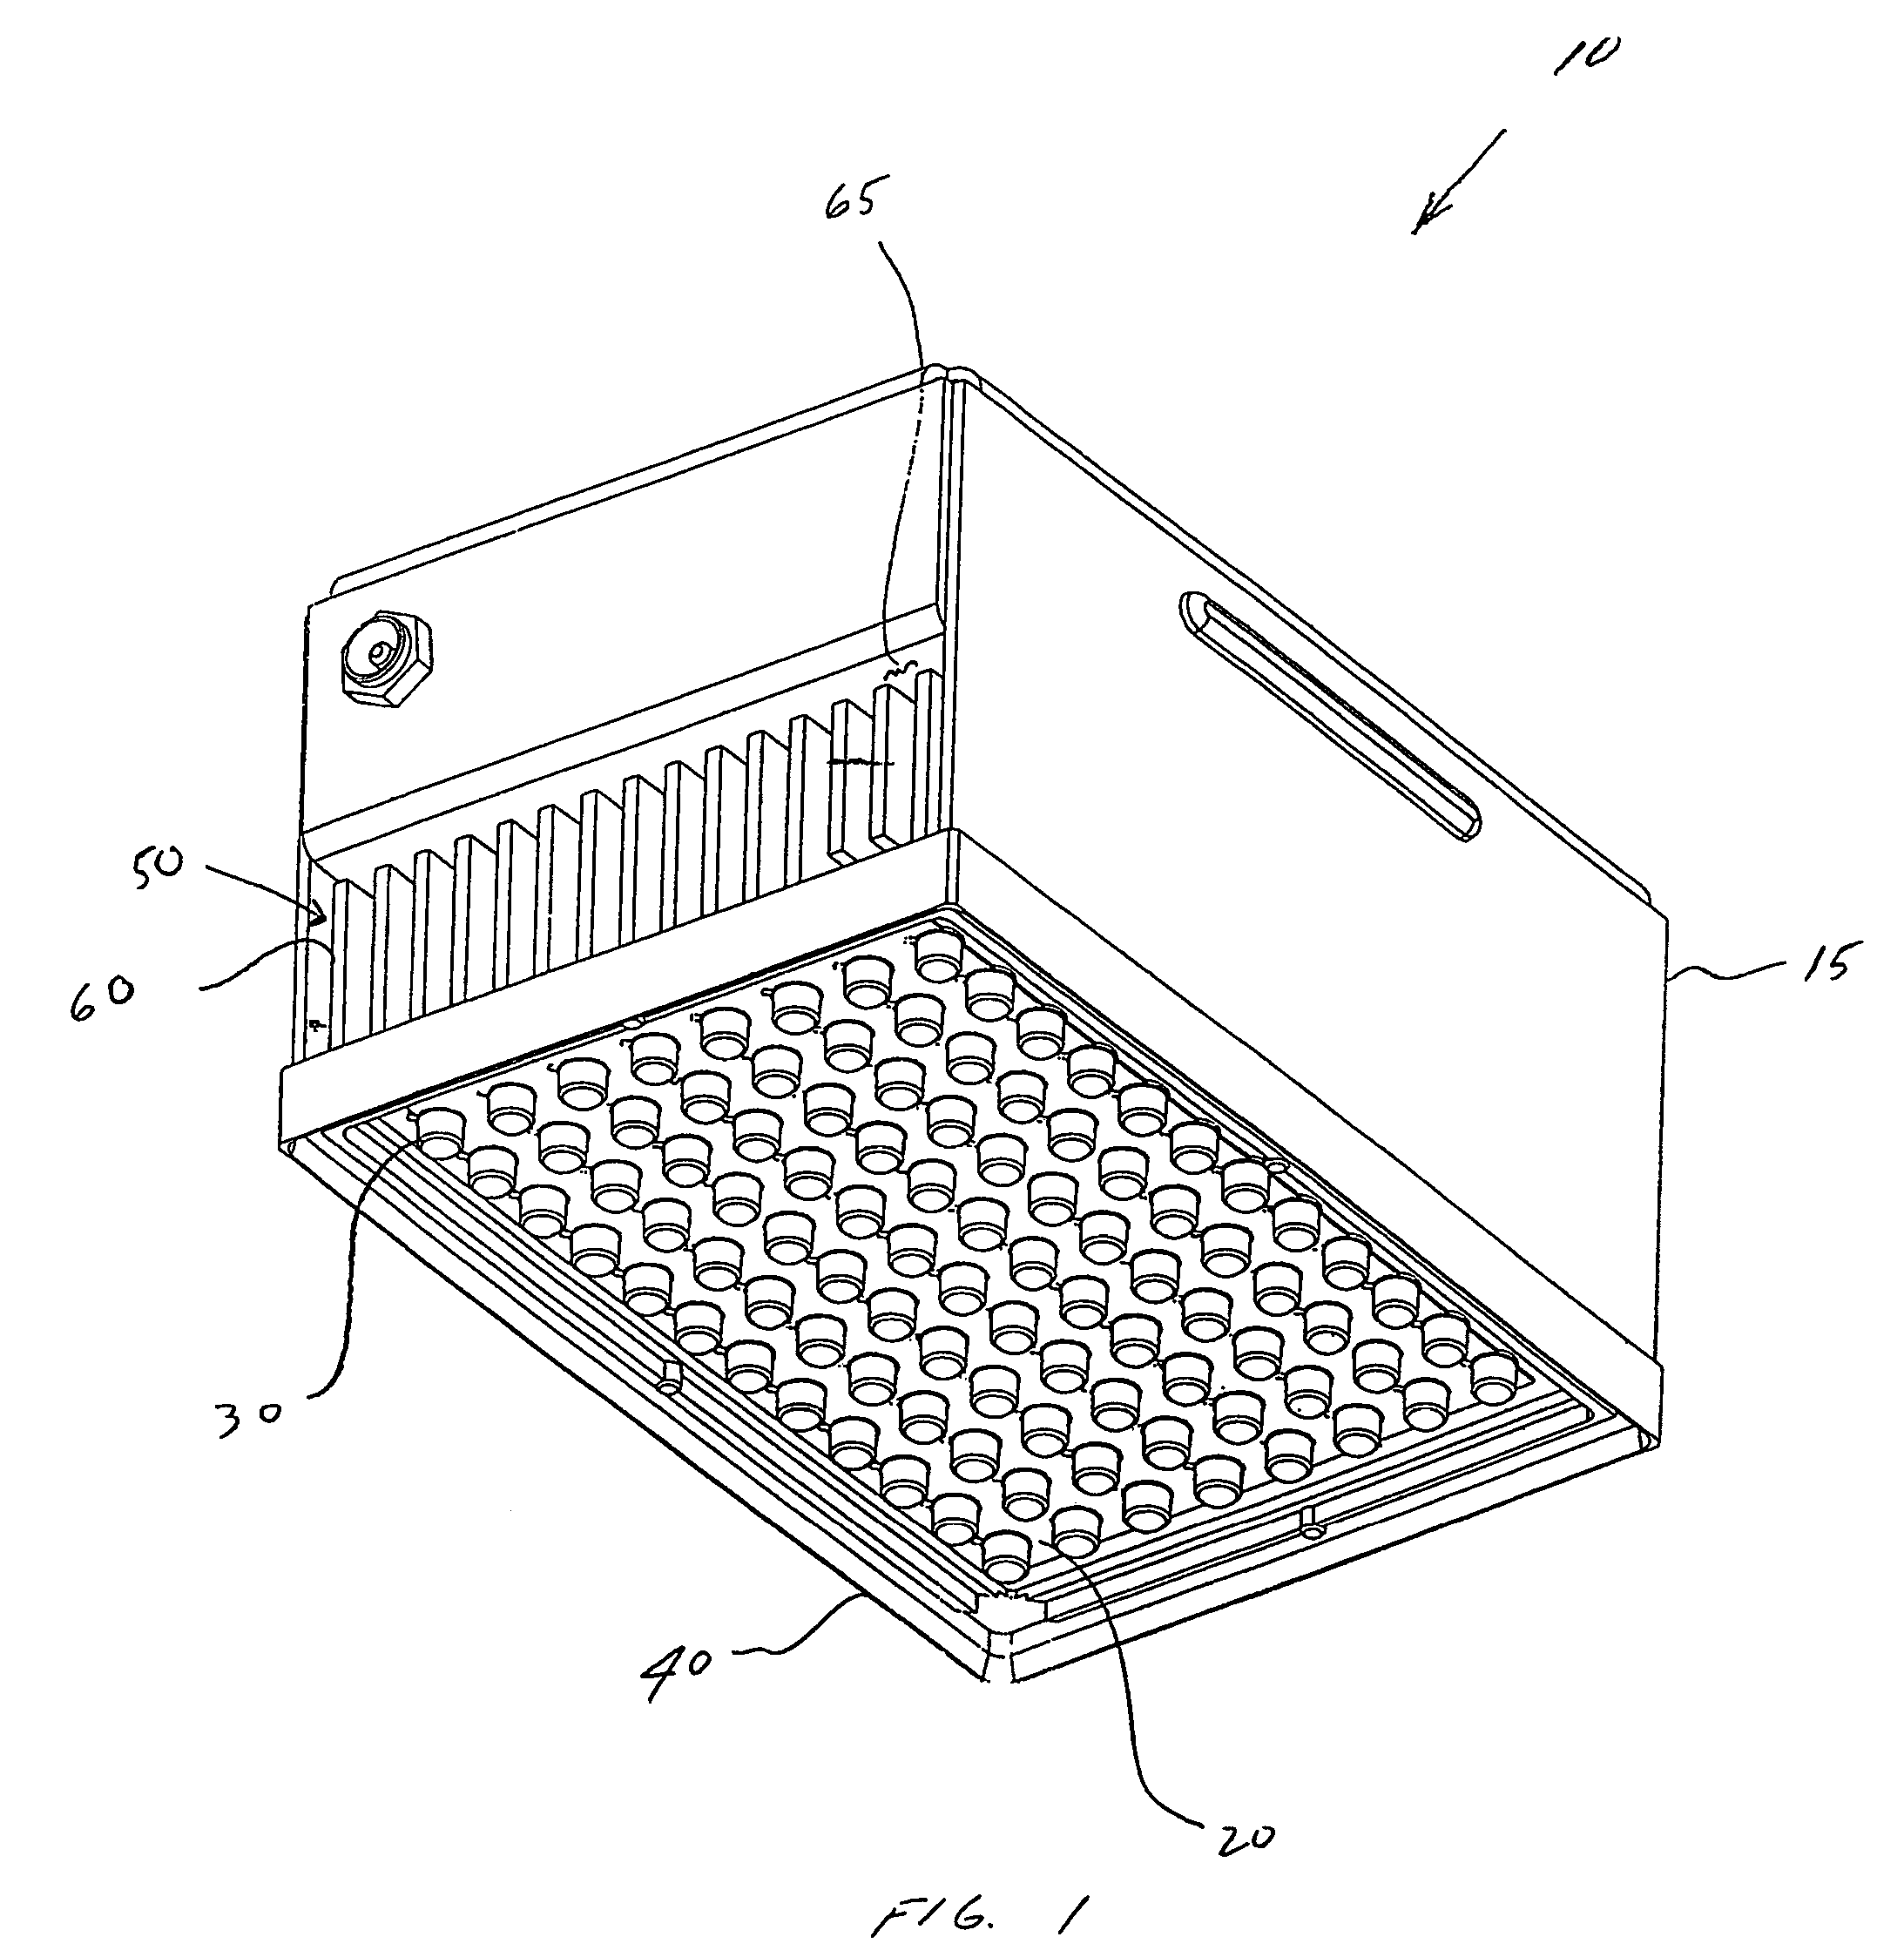 Photoactivation device and method